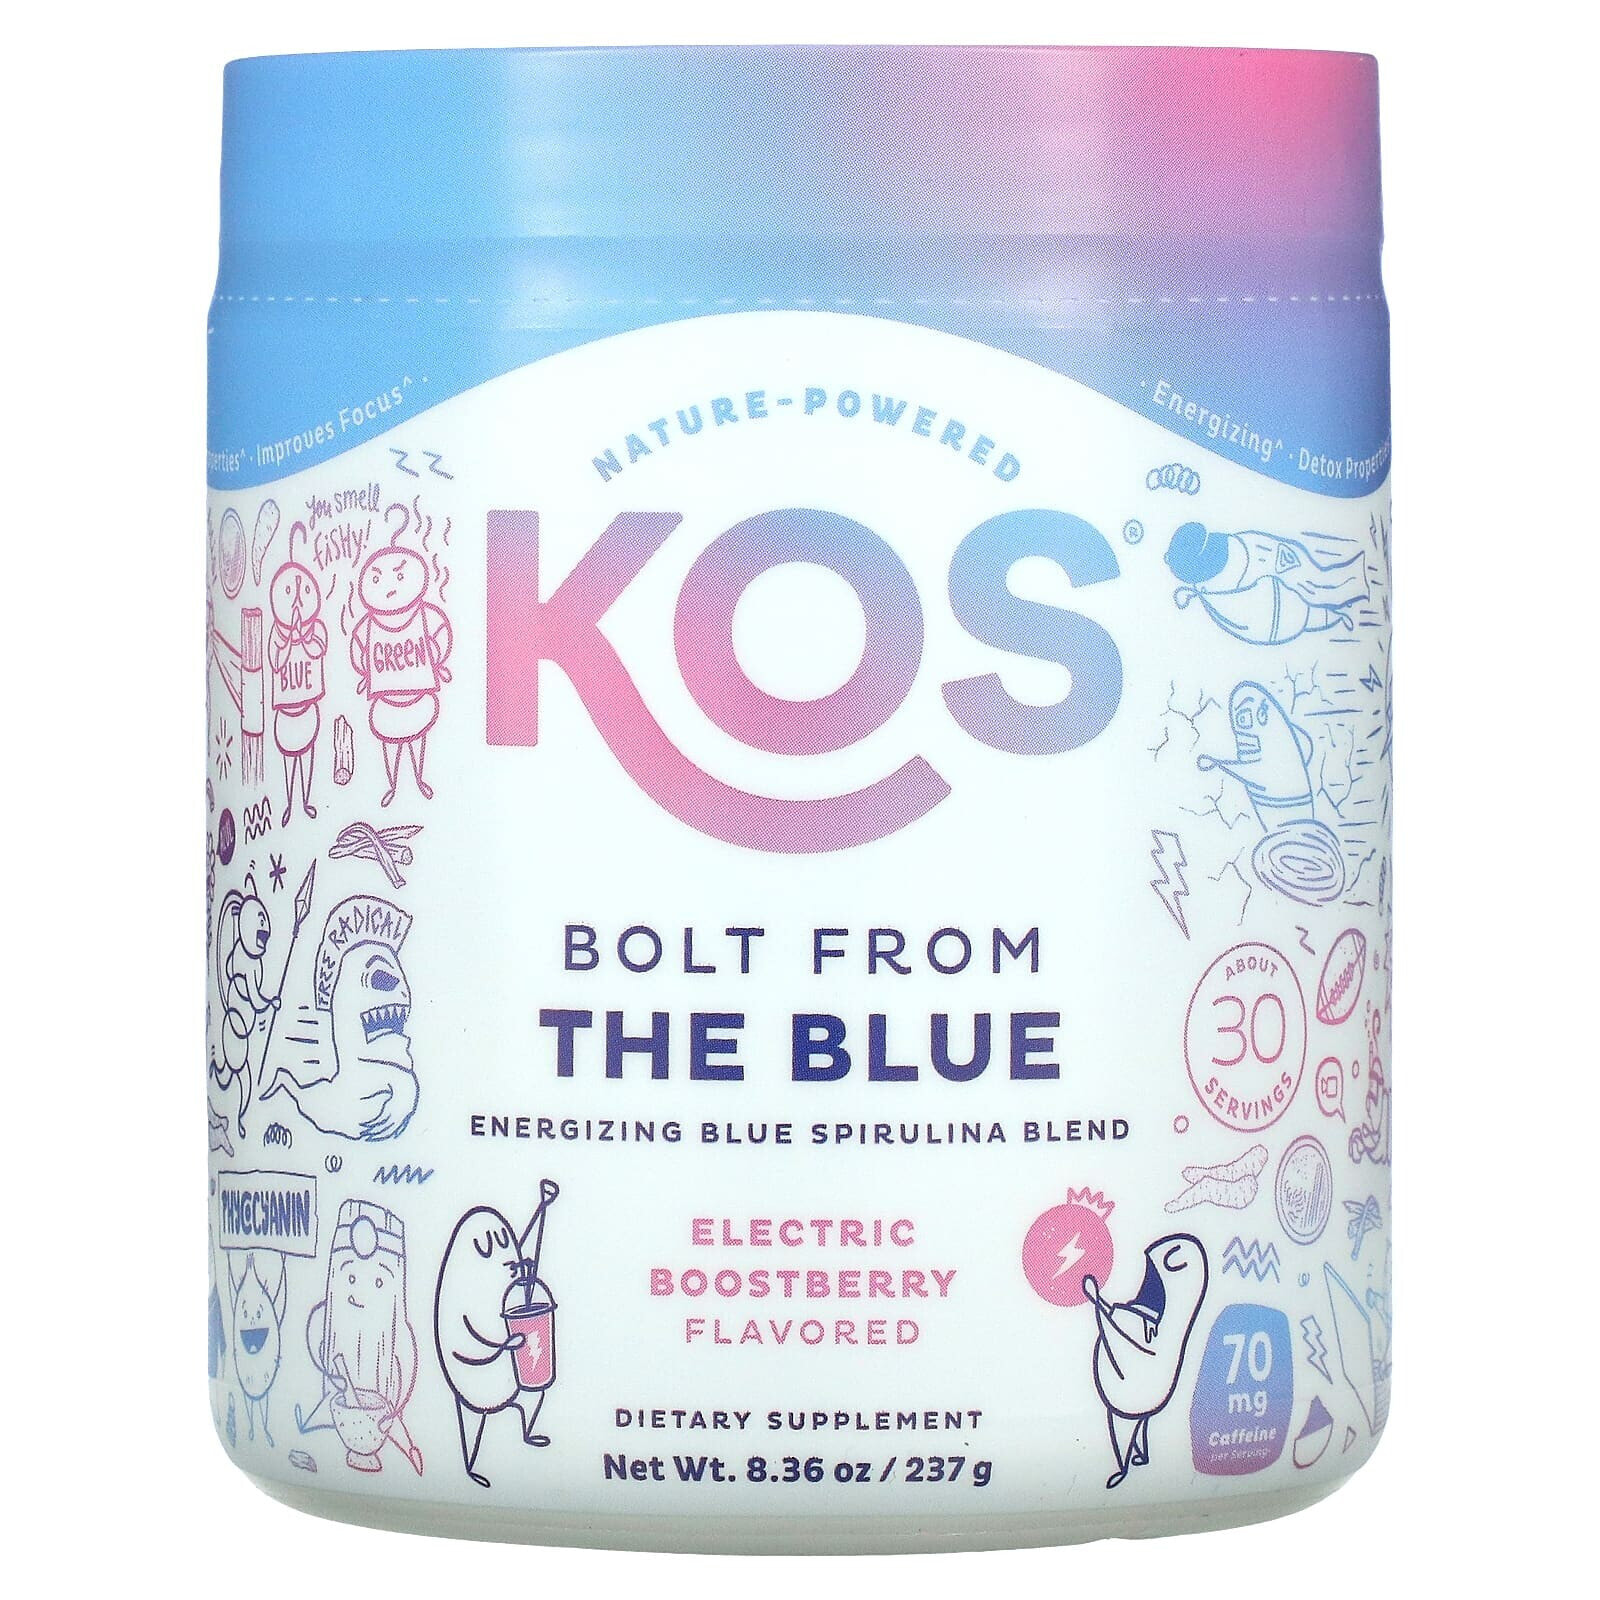 Bolt from the Blue, Energizing Blue Spirulina Blend, Electric Boostberry Flavored, 8.36 oz (237 g)